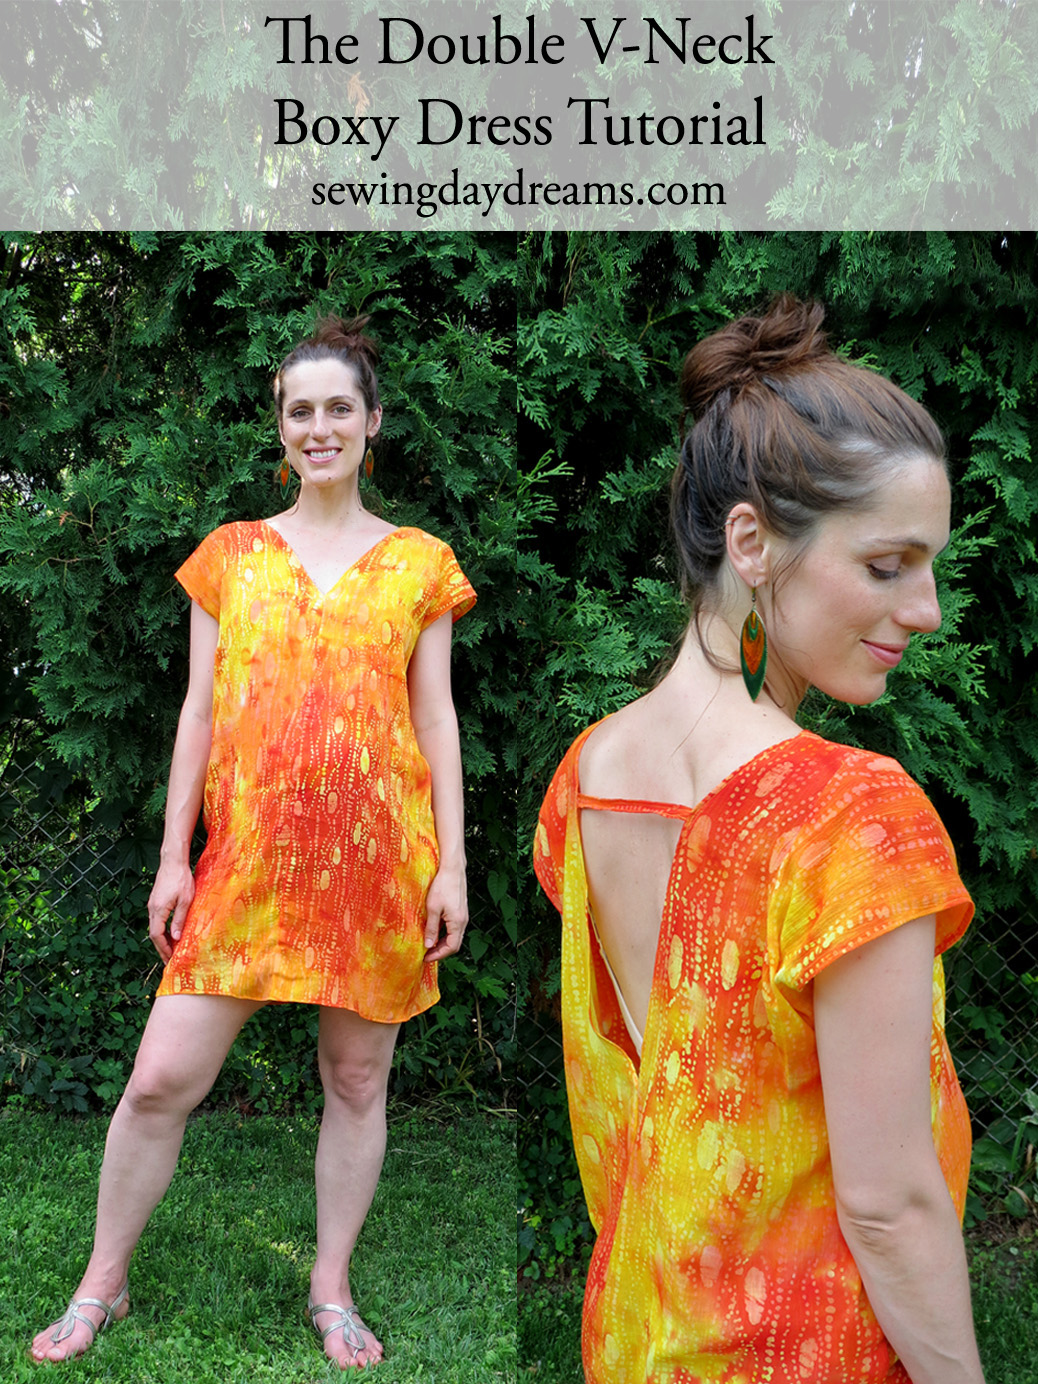 Diy The Double V Neck Boxy Dress Tutorial Sewing Daydreams 9646